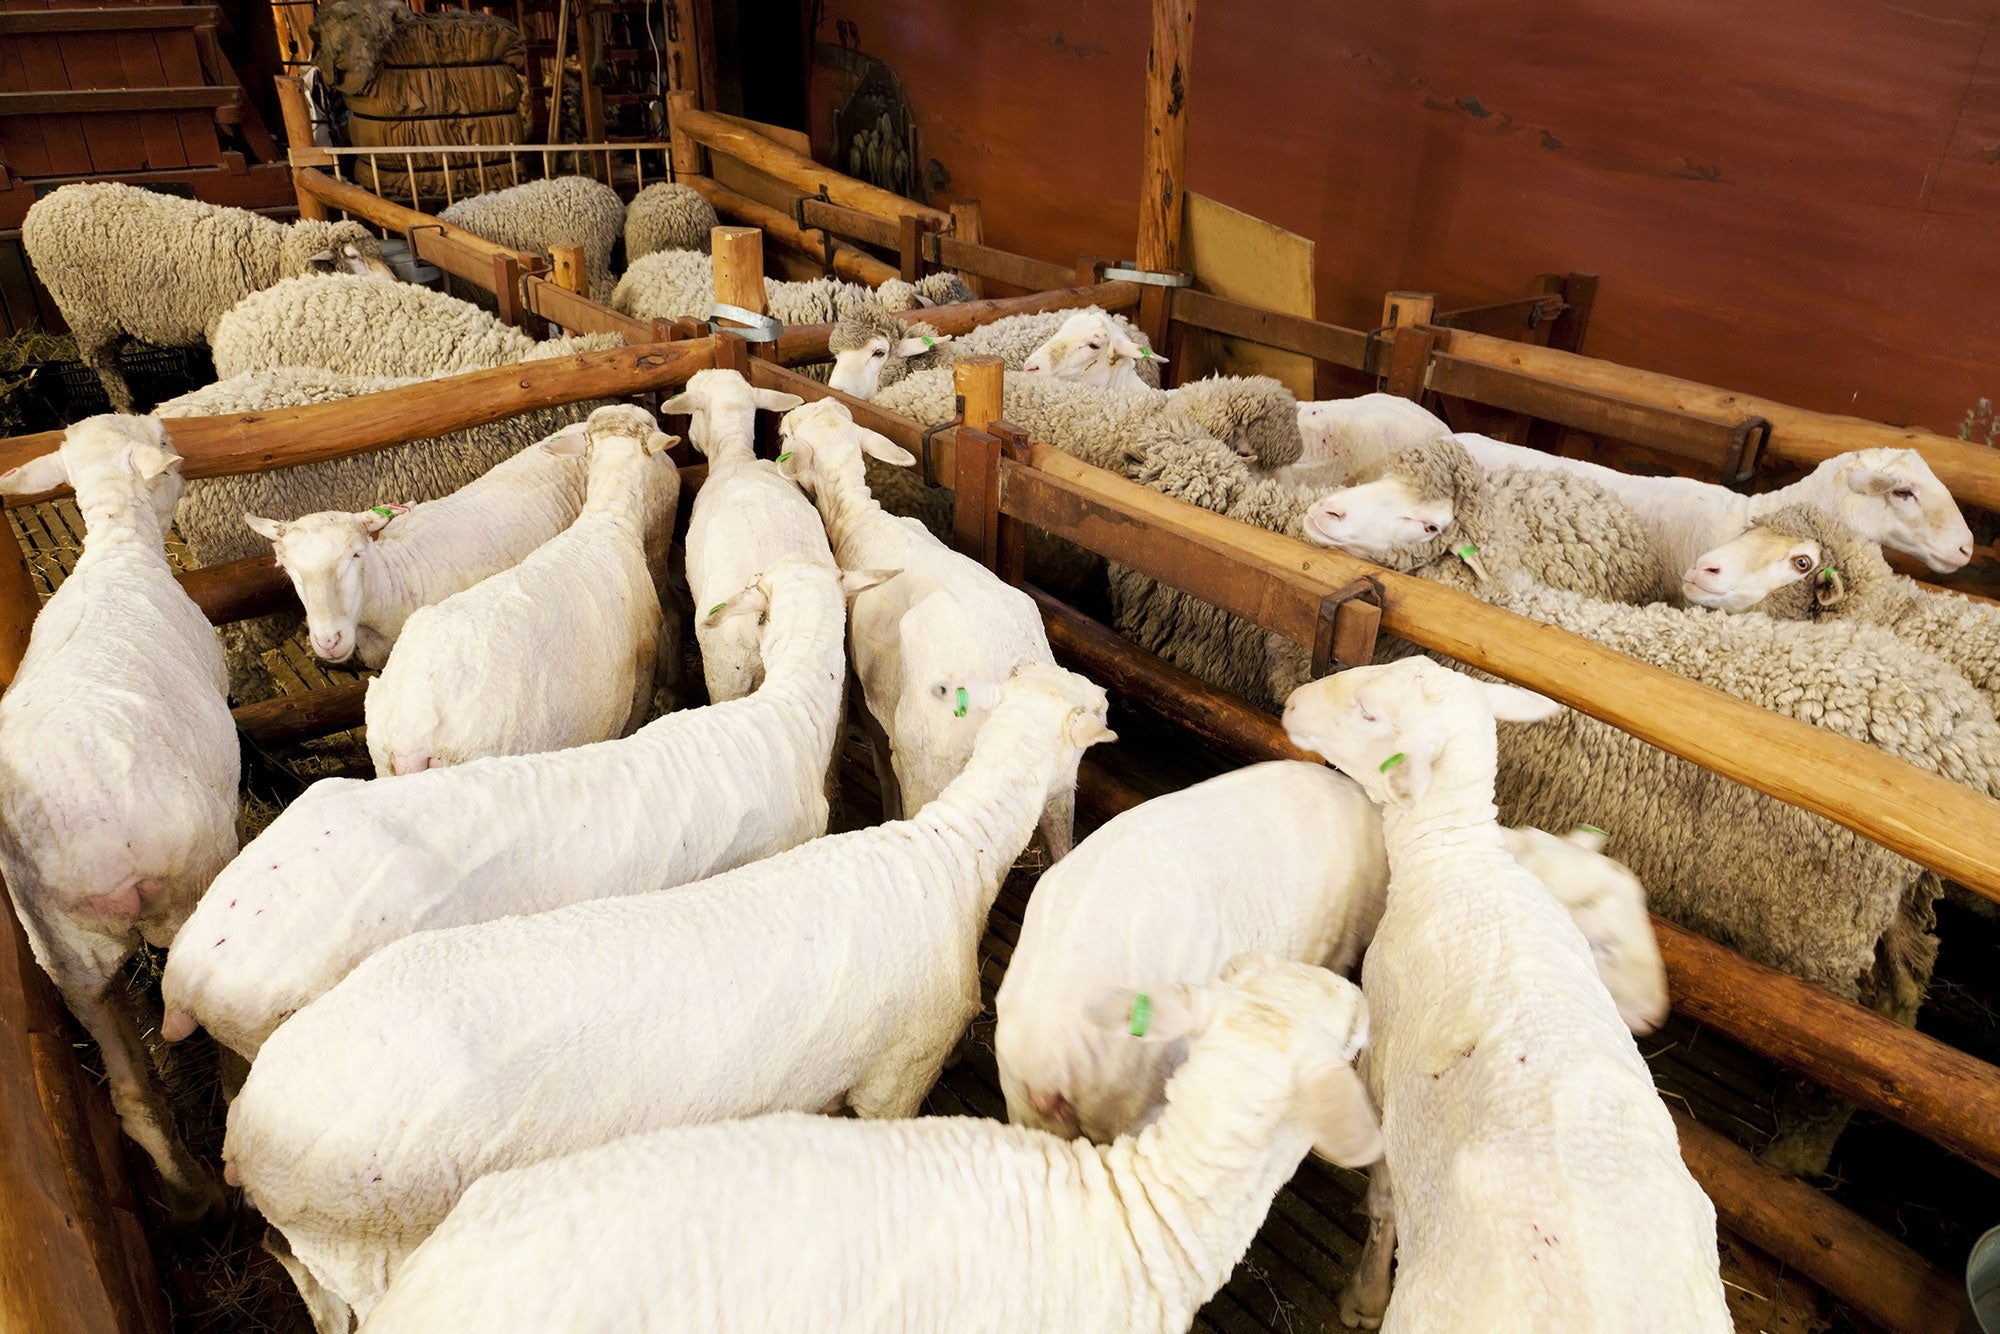 uggs treatment of sheep